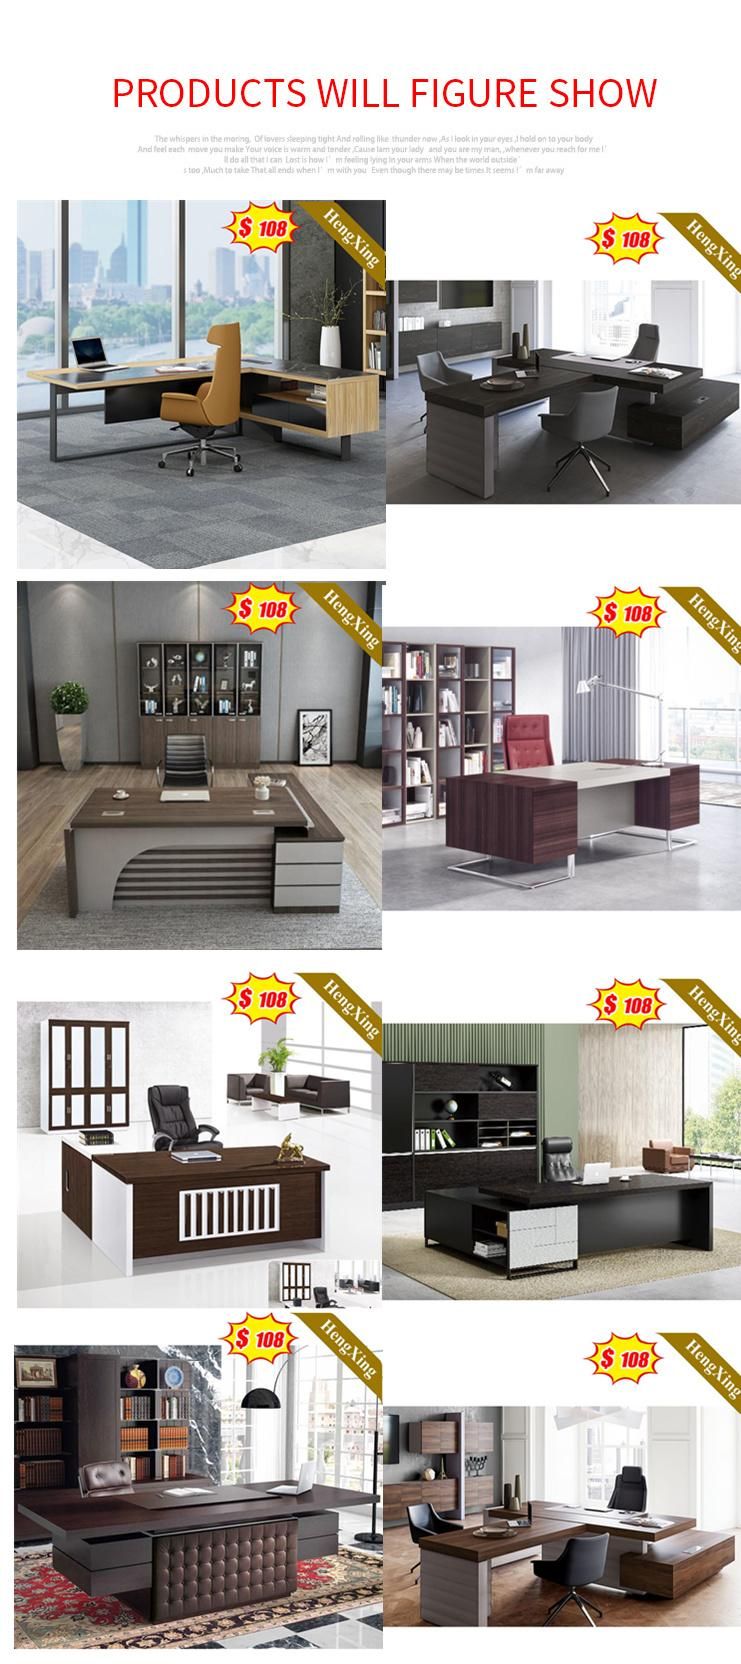 China Wholesale Wooden Meeting Computer Table Chair Furniture Office Desk